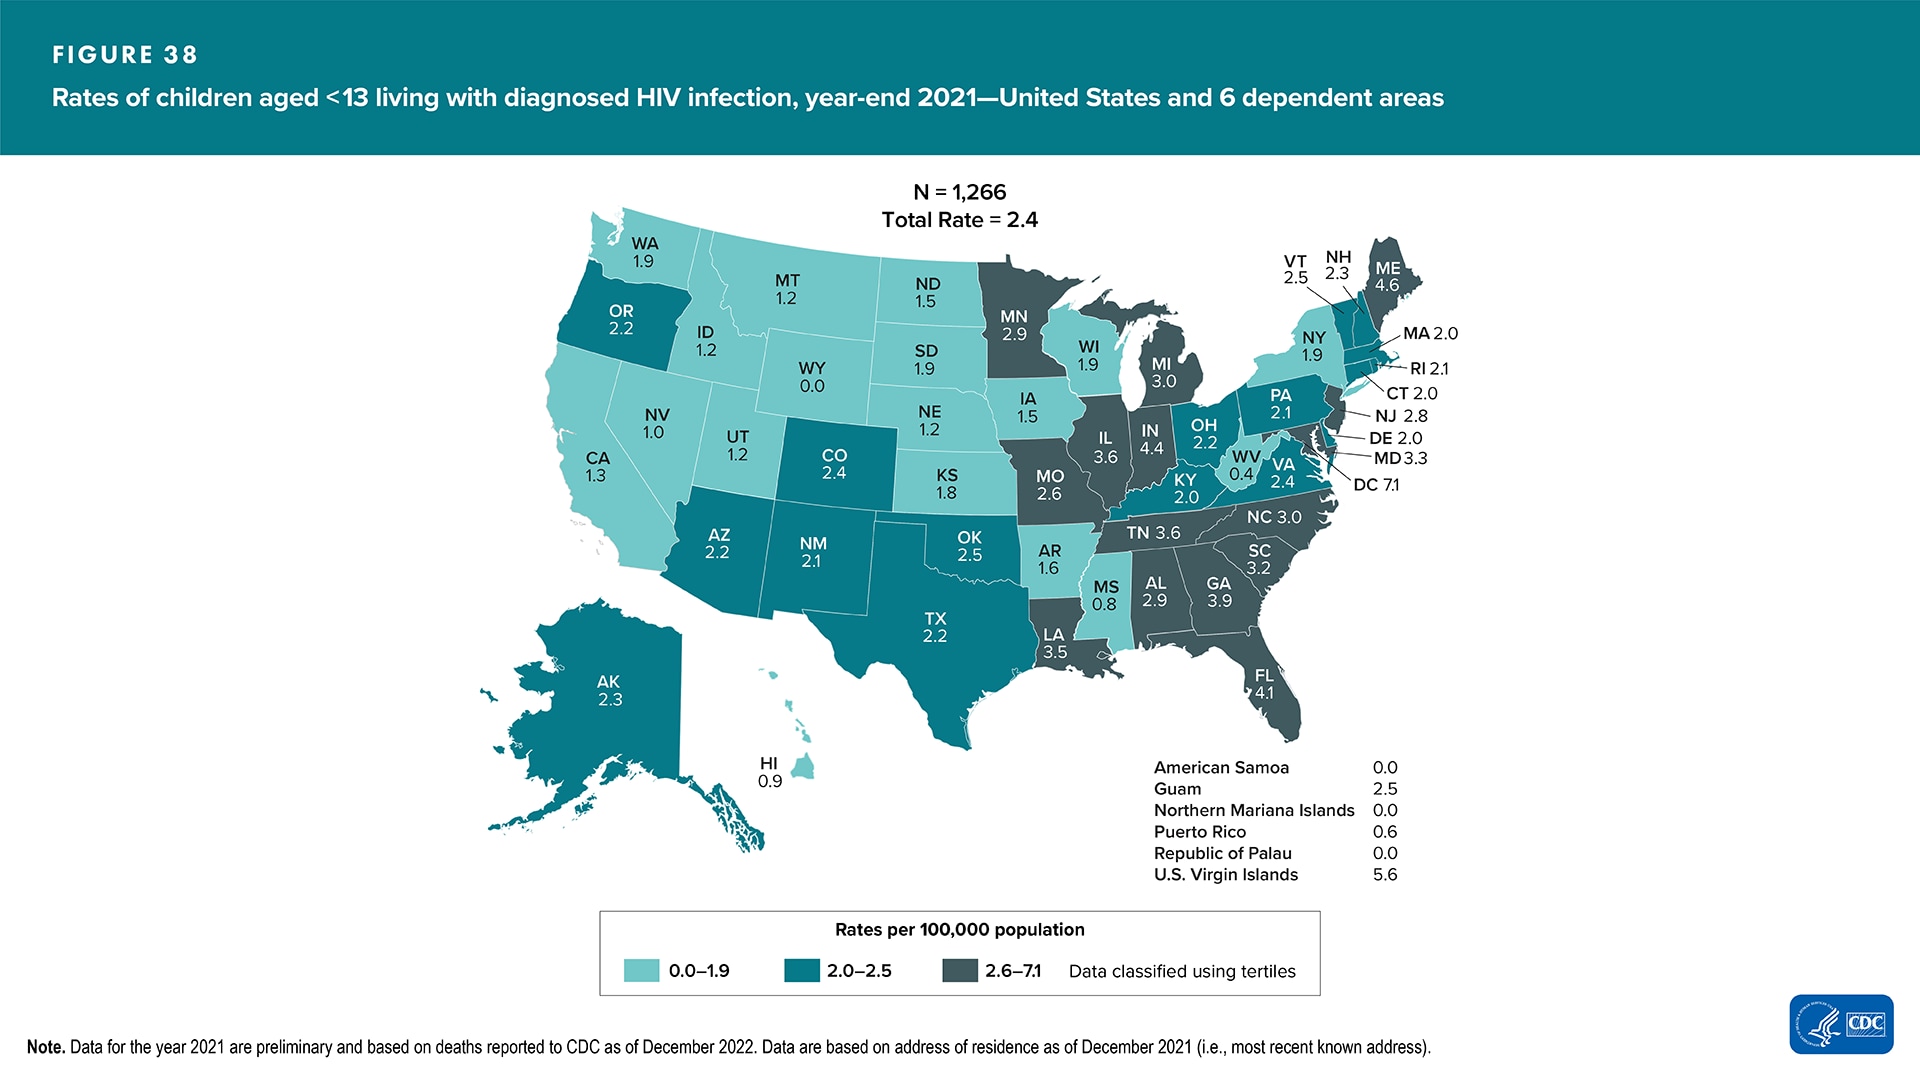 At year-end 2021 in the United States and 6 dependent areas, approximately 1,266 children were living with diagnosed HIV infection. The overall rate of persons aged < 13 years living with diagnosed HIV infection was 2.4 per 100,000 population.